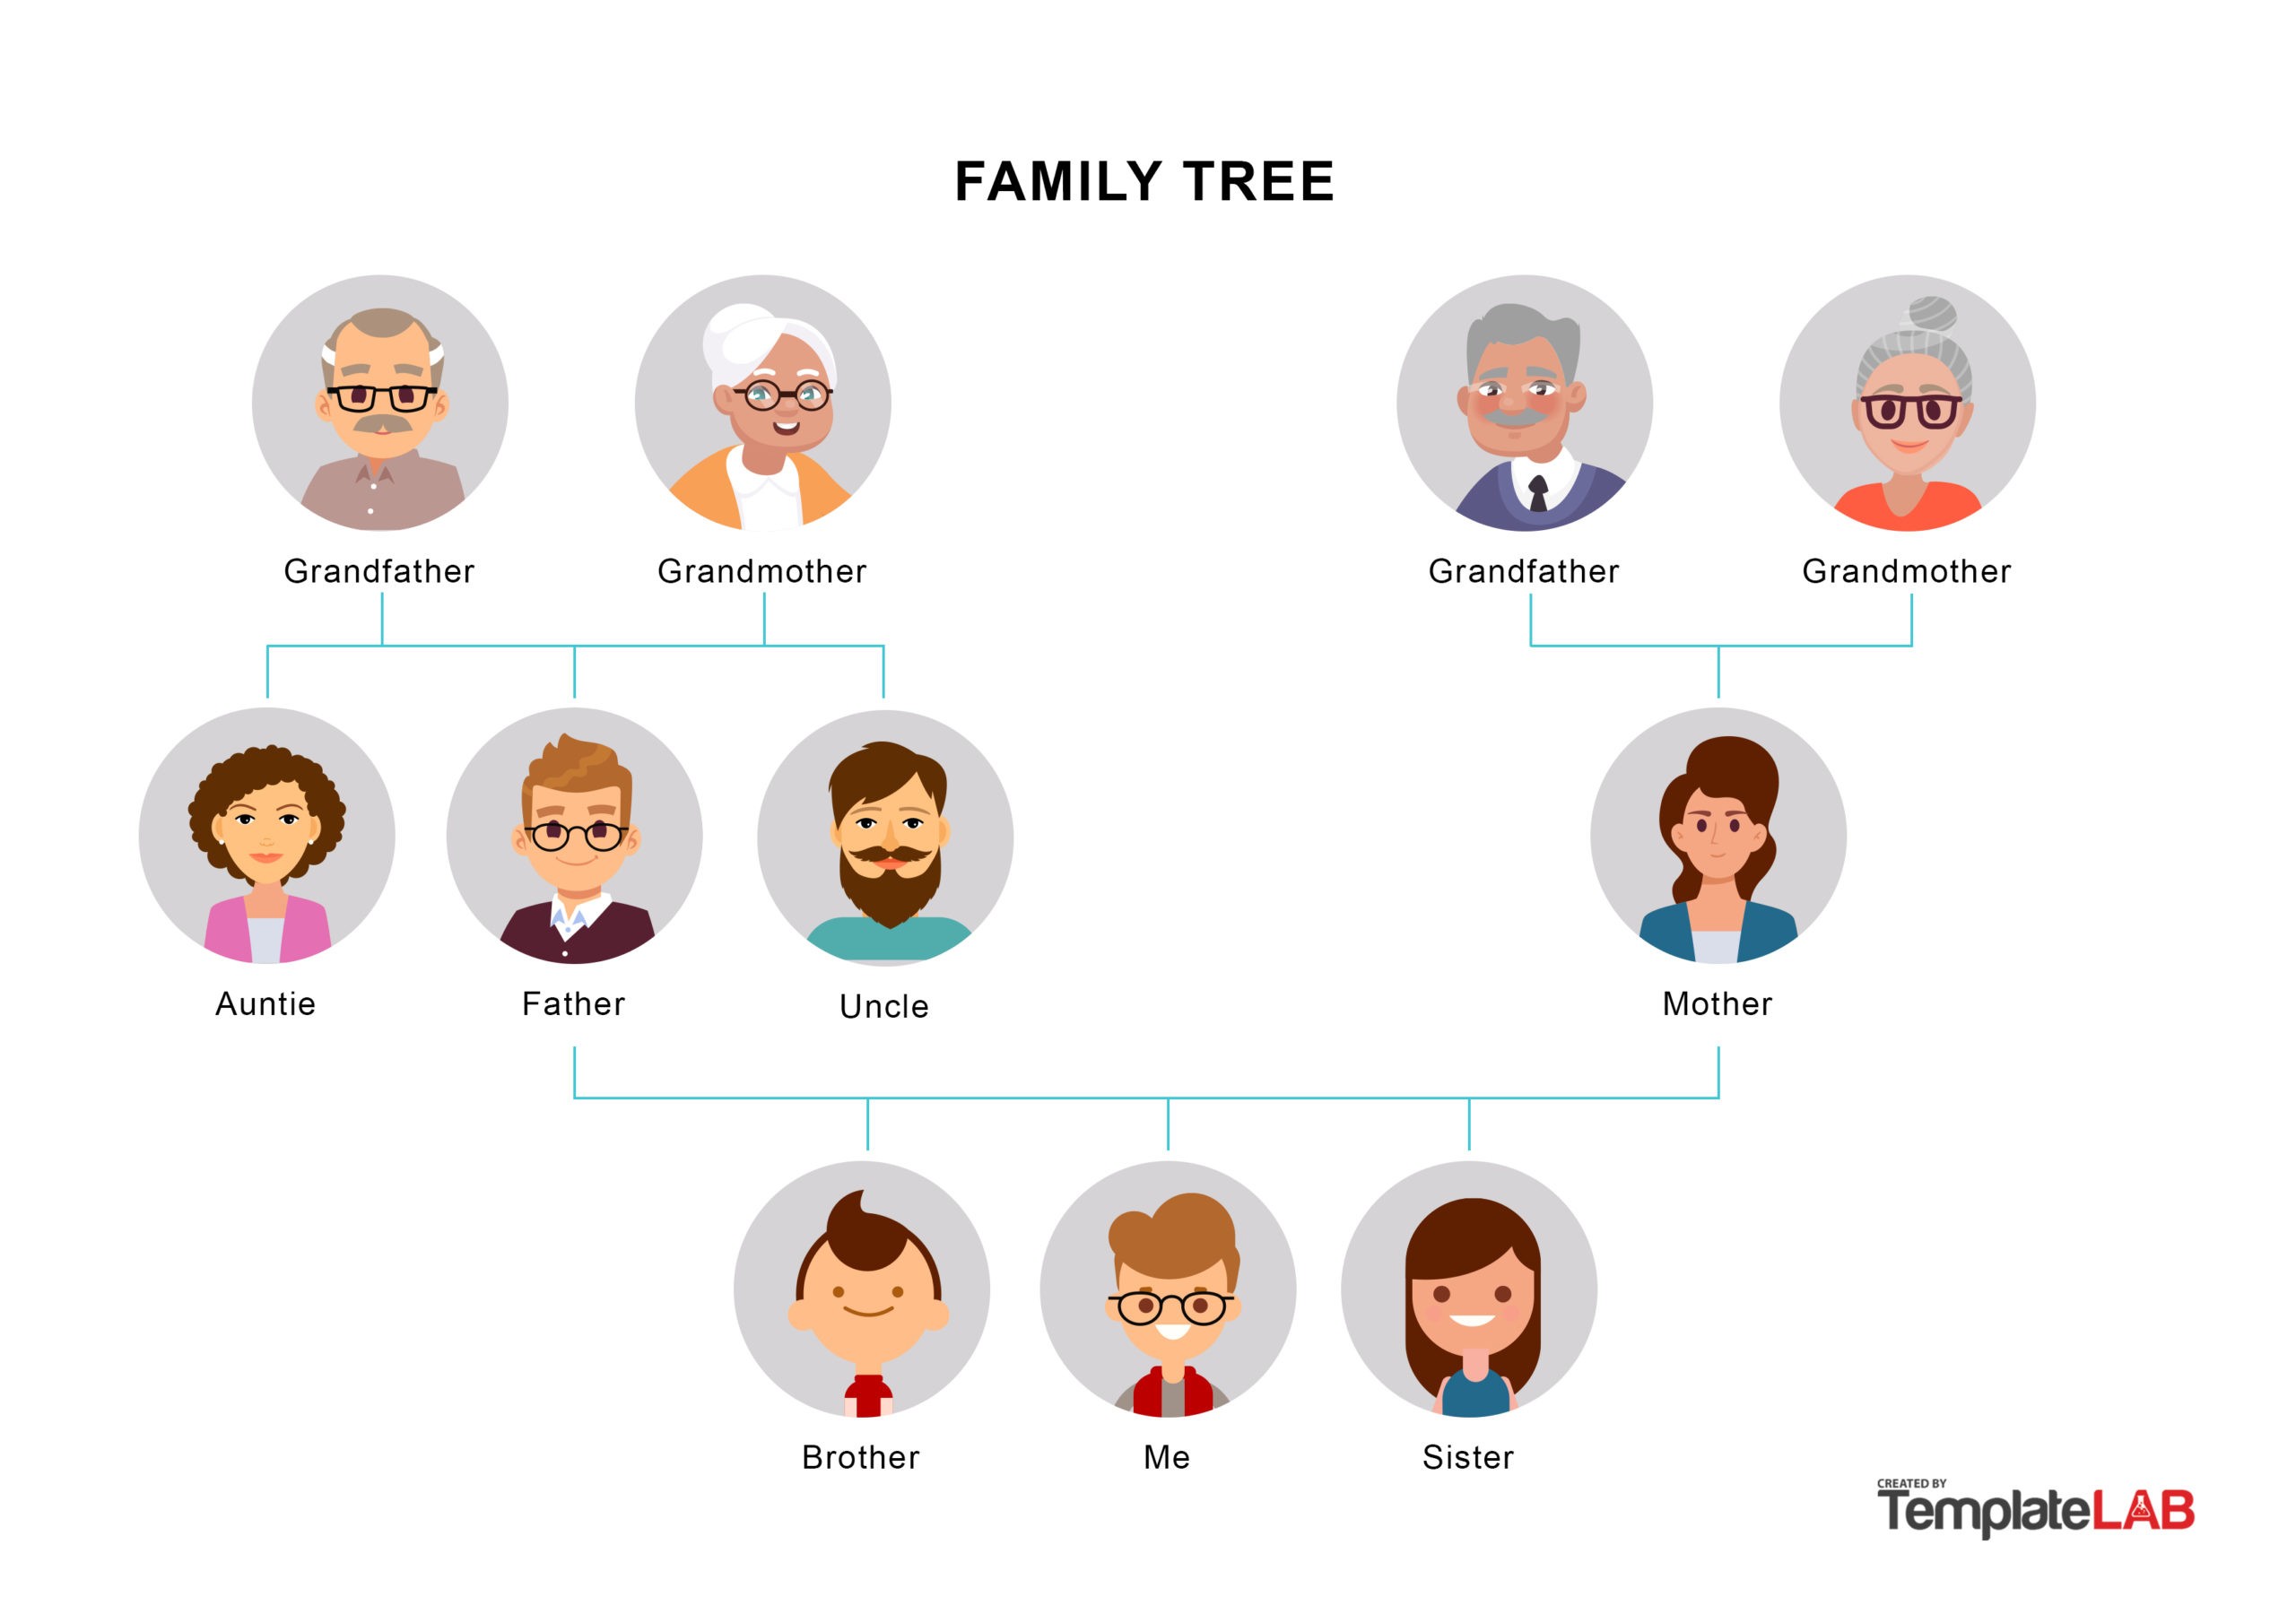 can you make a family tree in word